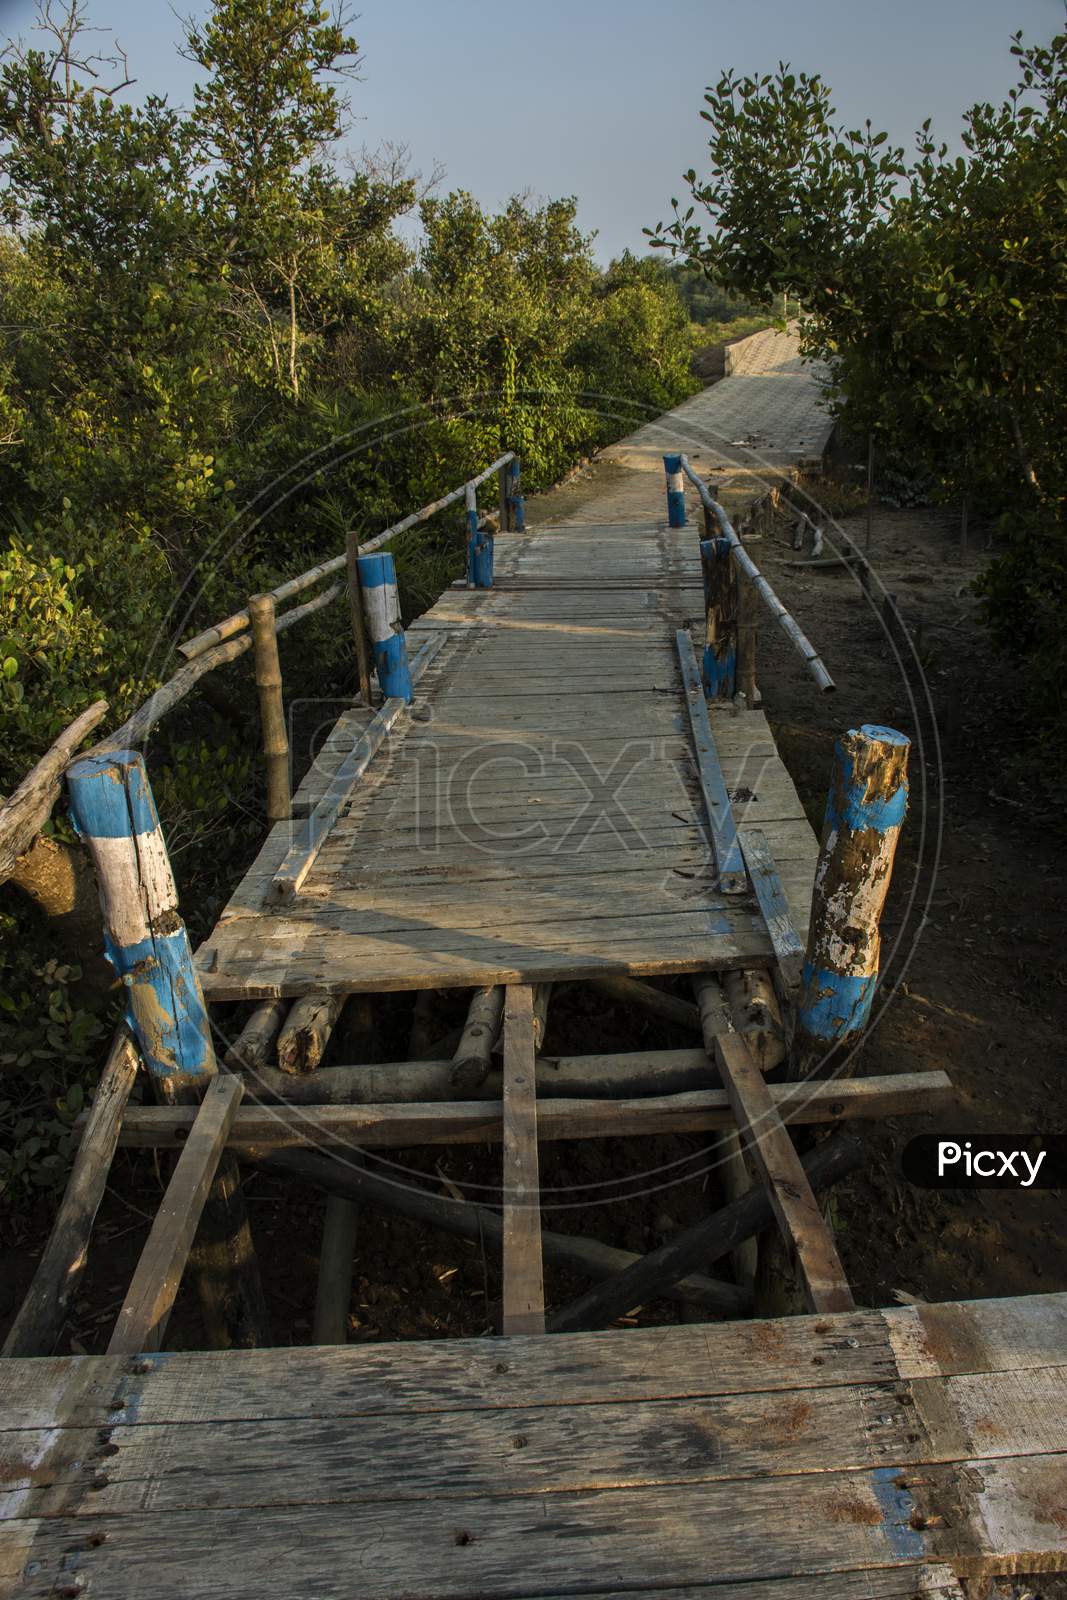 A Bamboo Bridge At The Entry Point Of "Henry Island".